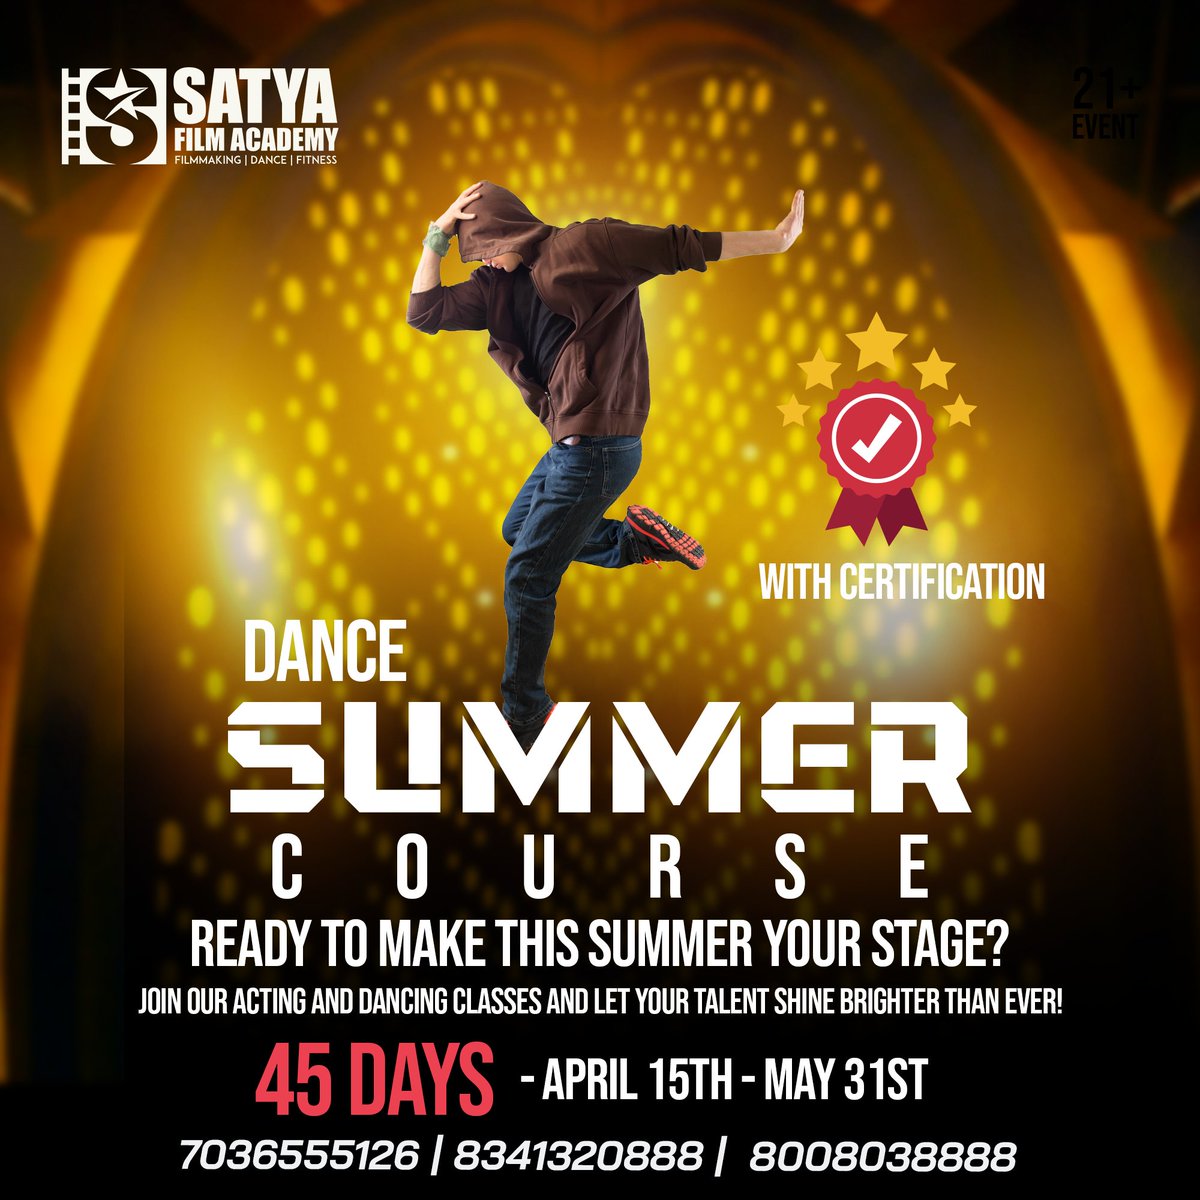 This summer elevate your dance moves with Satya Flim Acadmey dance summer course for 45 Days starting 15April2024 ending 31may2024.Grove move shine with us. book your slot now.
#SatyaFilmAcademy #summerdance #summerclass #summercamp #DanceWorkshop #DanceClass #DanceTraining